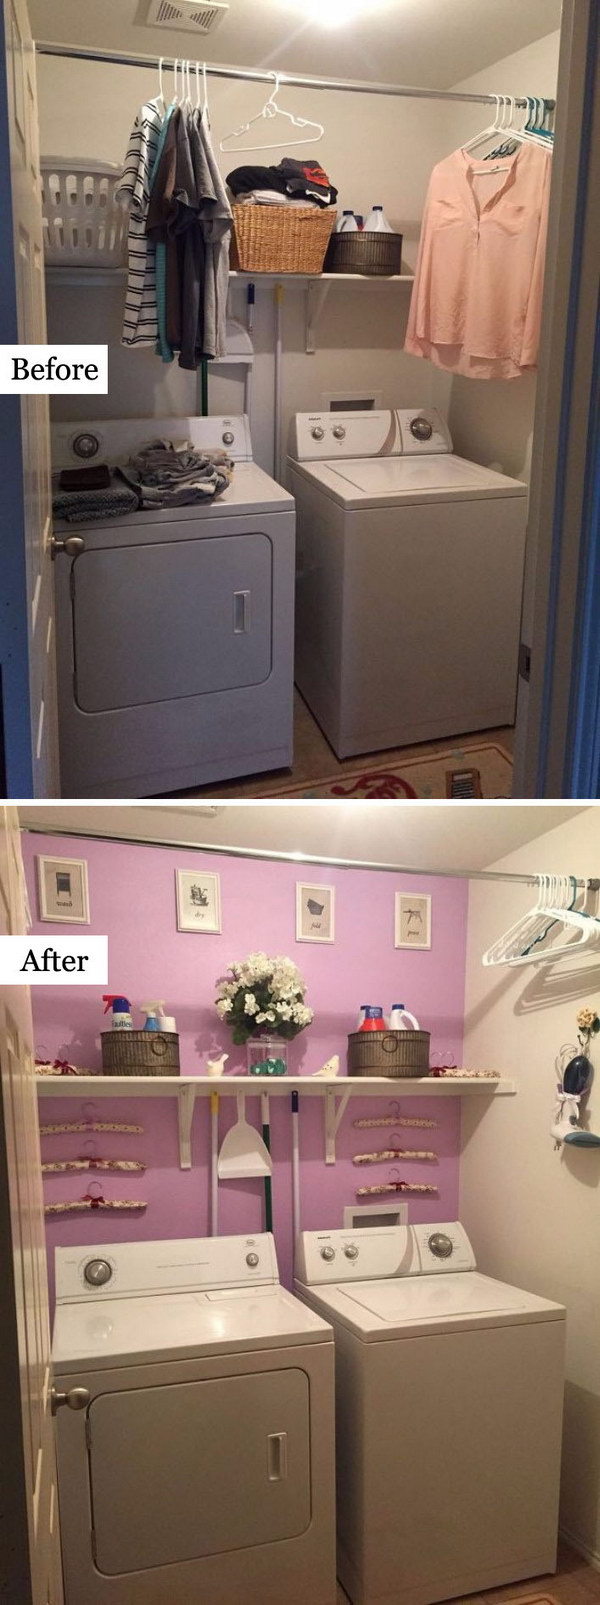 Laundry Room Makeover: The New Wall Color . 